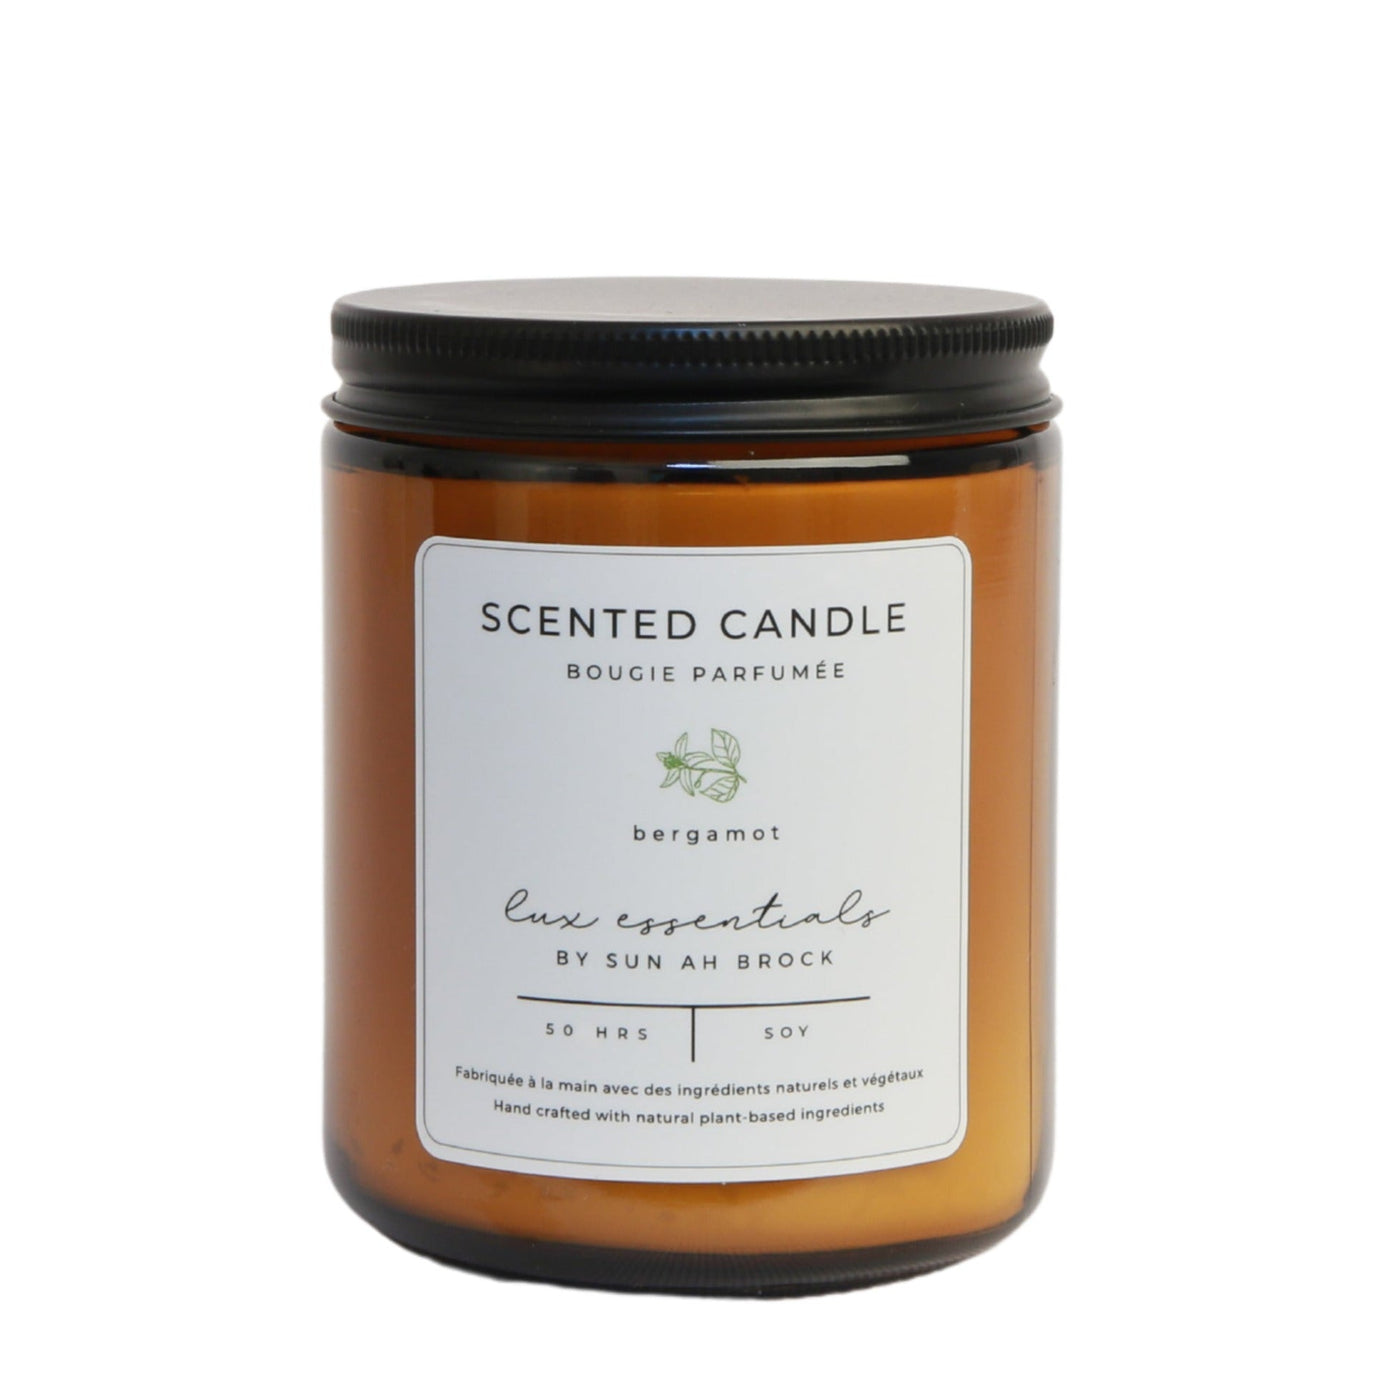 LUX essentials Bergamot Soy Candle